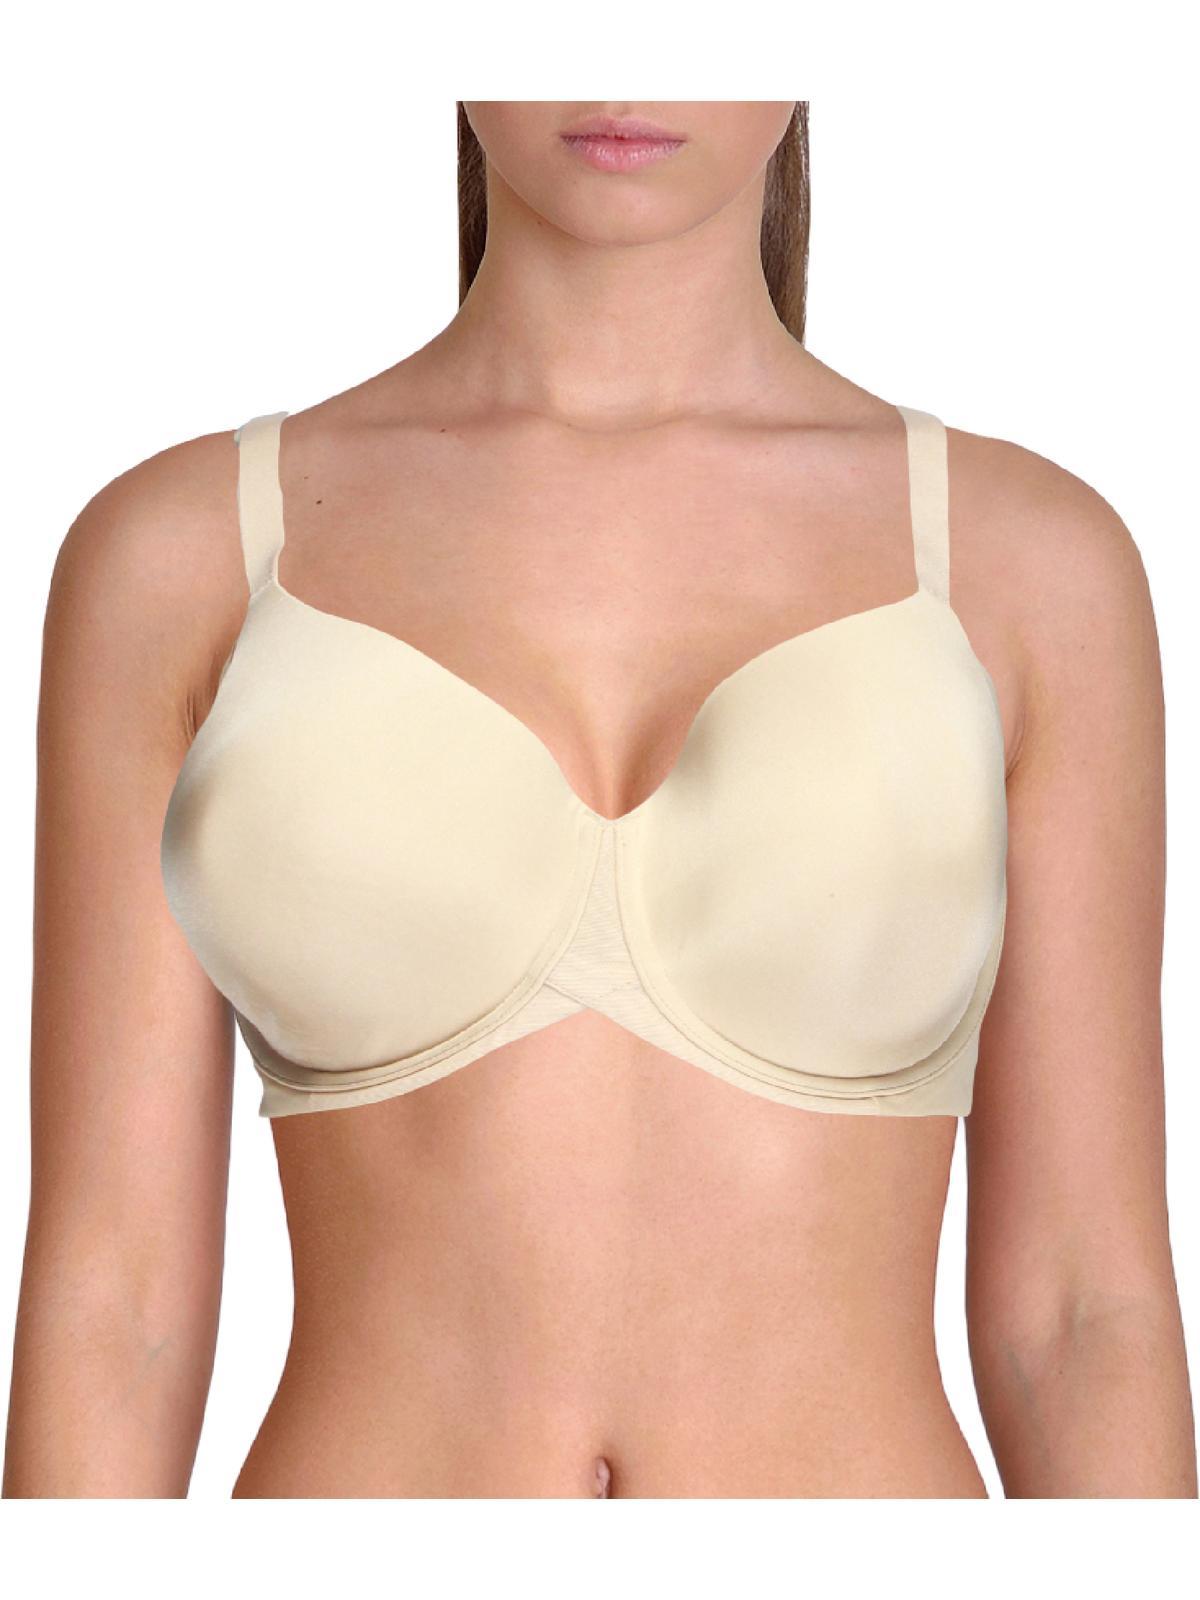 Wacoal Ultimate Side Smoother Wire-Free Contour Bra - Bergdorf Goodman